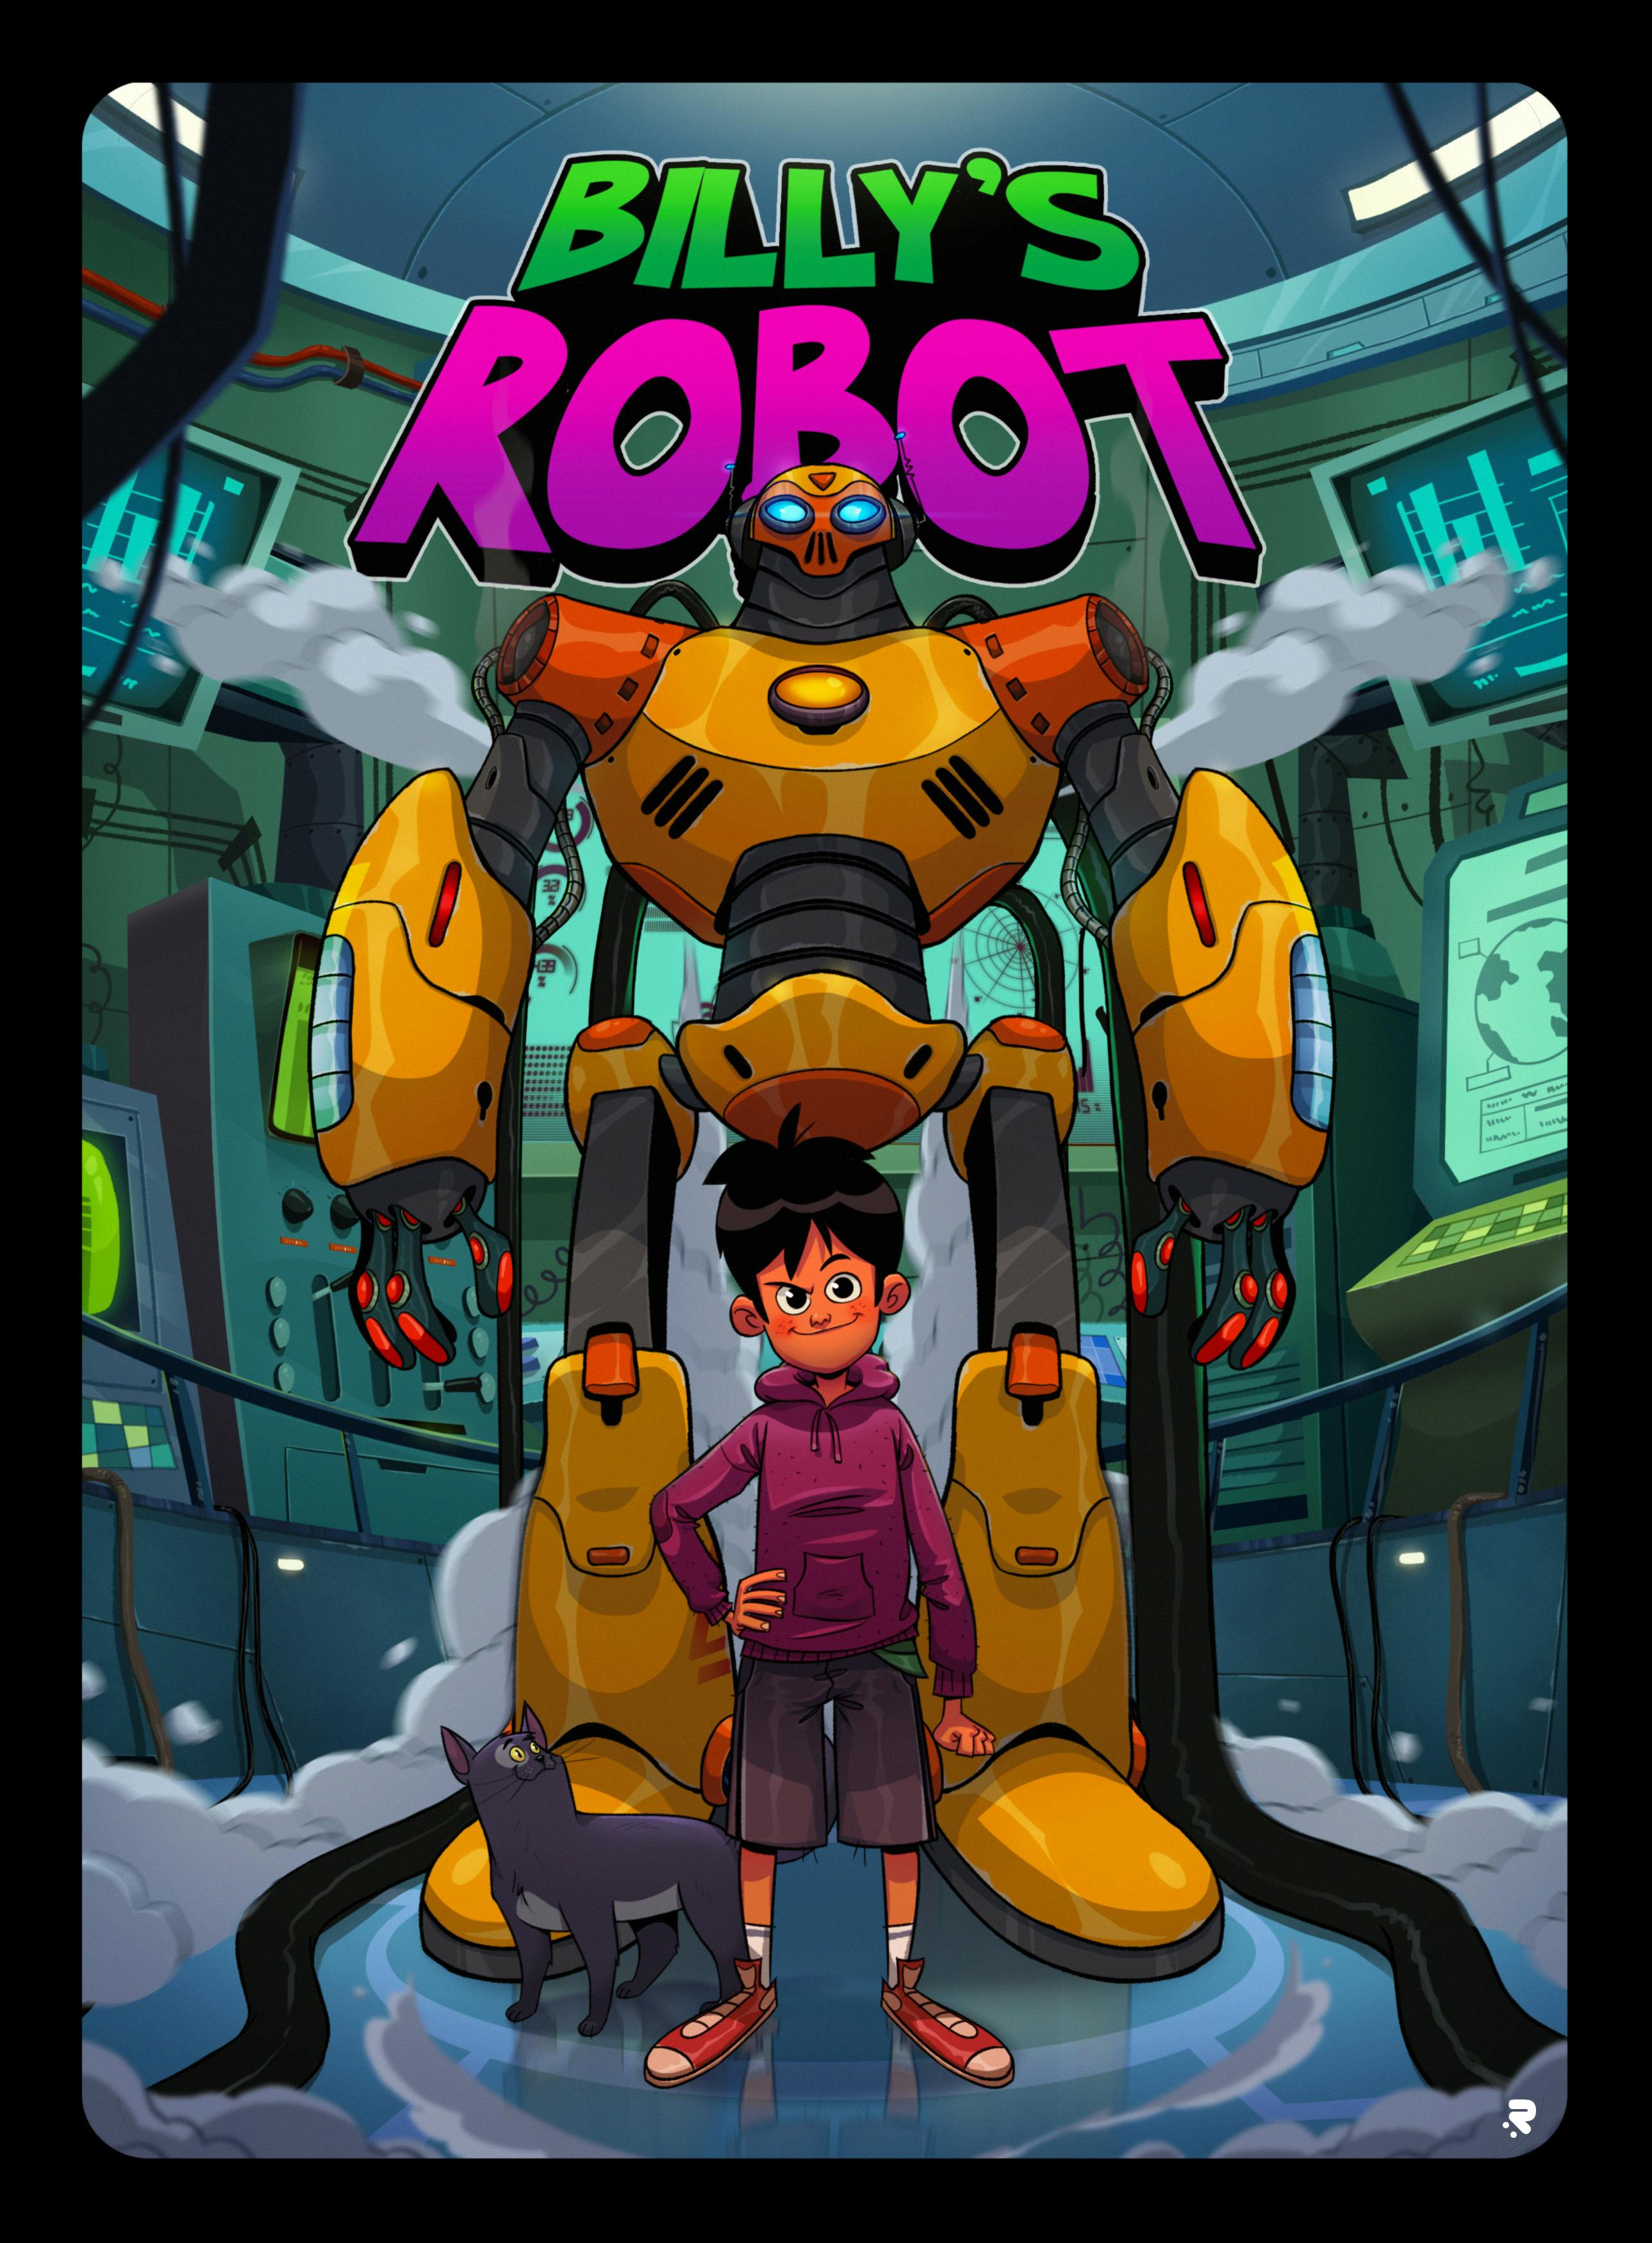 Billy's Robot poster